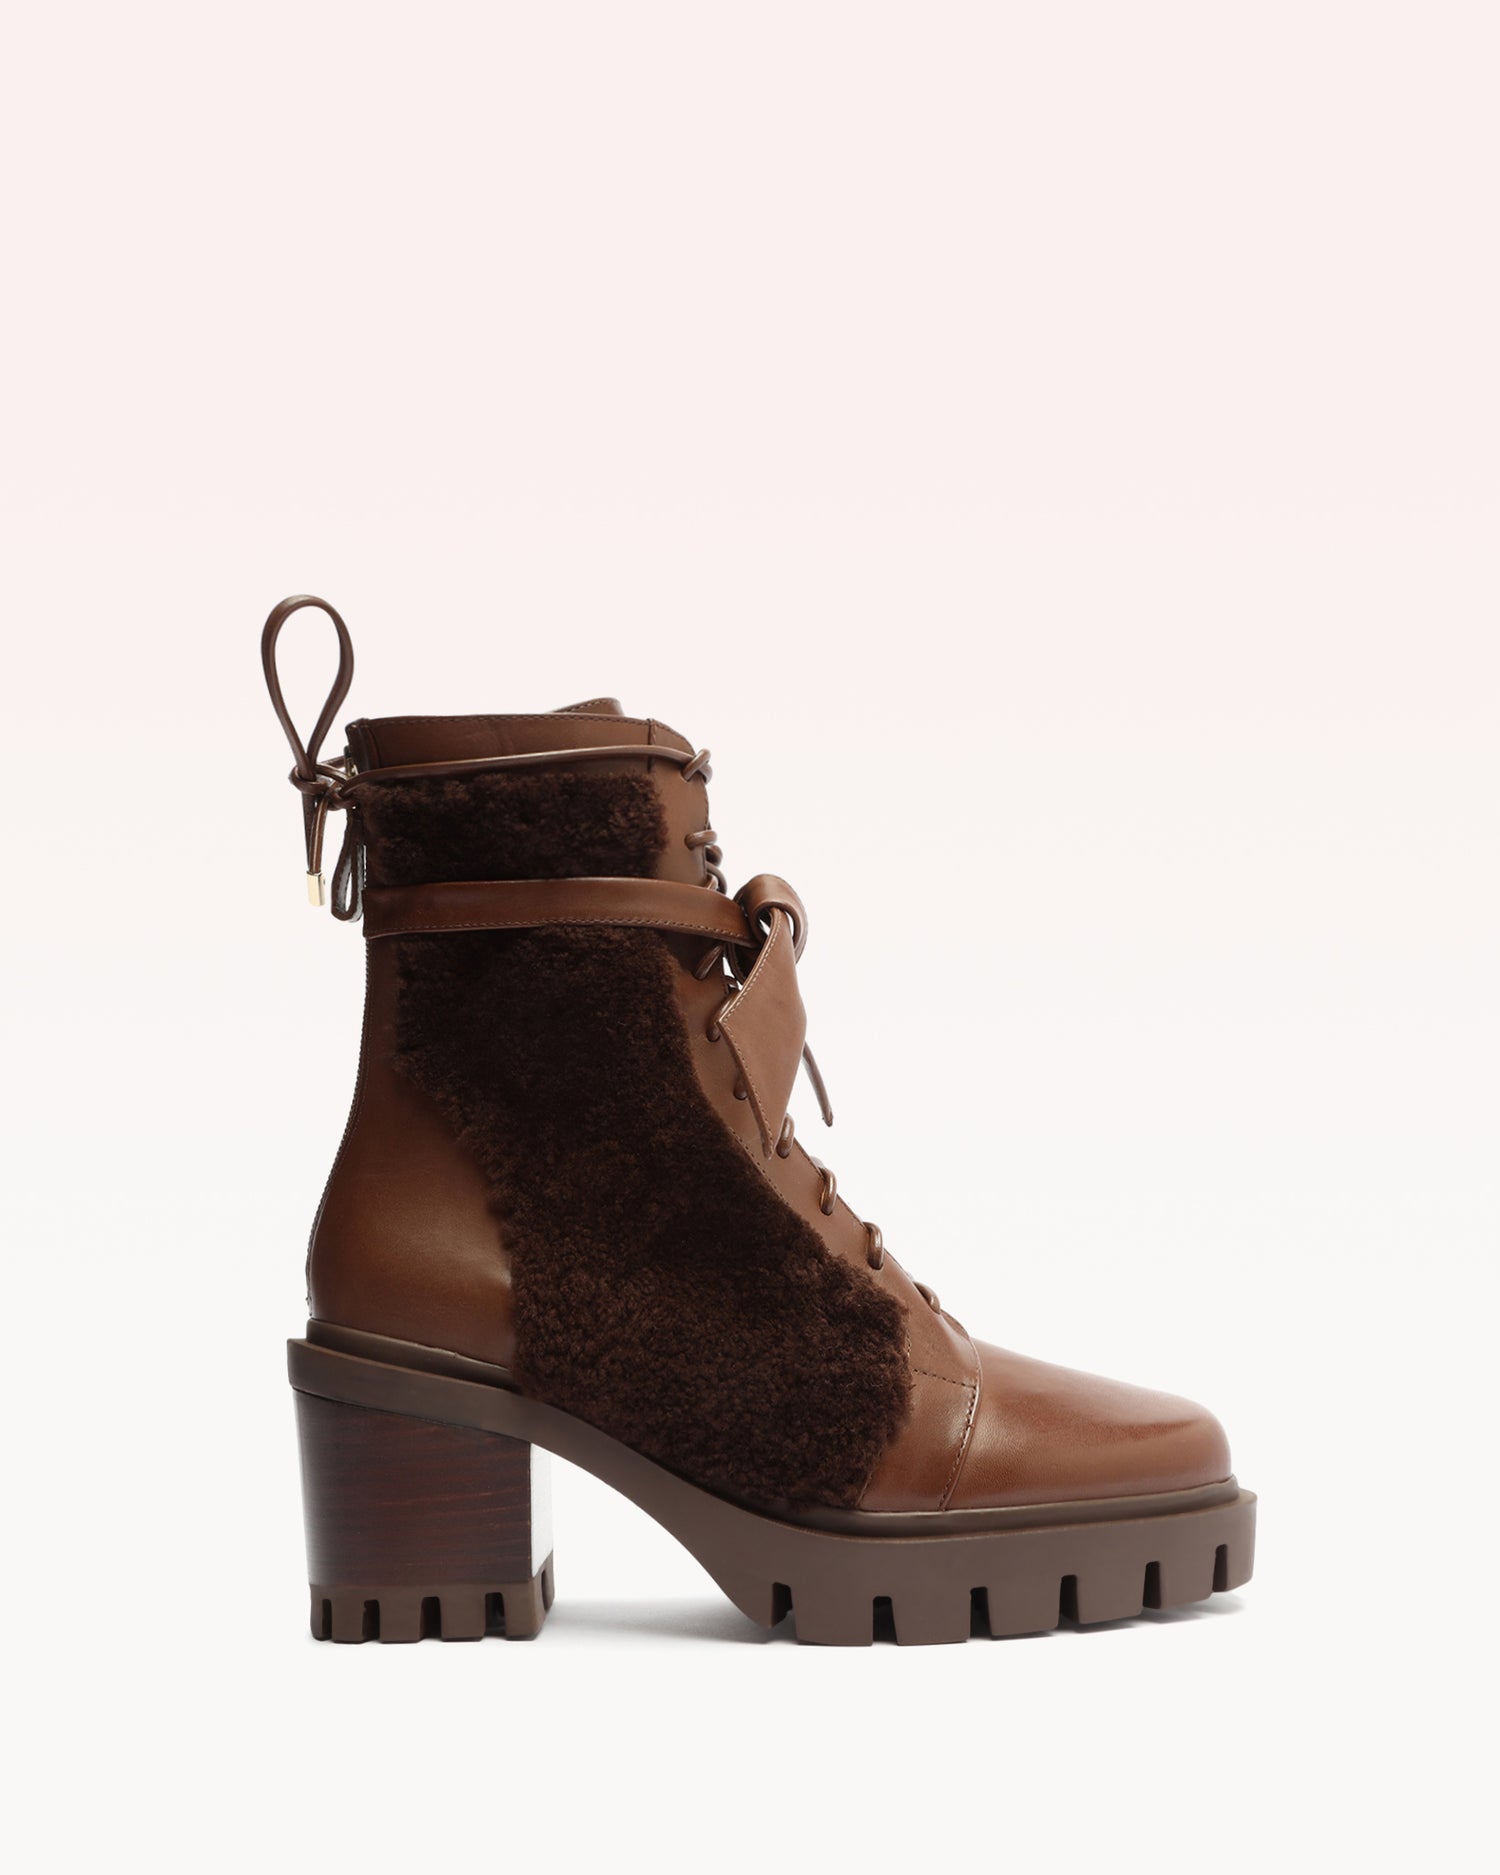 Shearling Clarita Combat Bootie 65 Mousse Boots R/23 35 Mousse Nappa Elegance & Curly Shearling